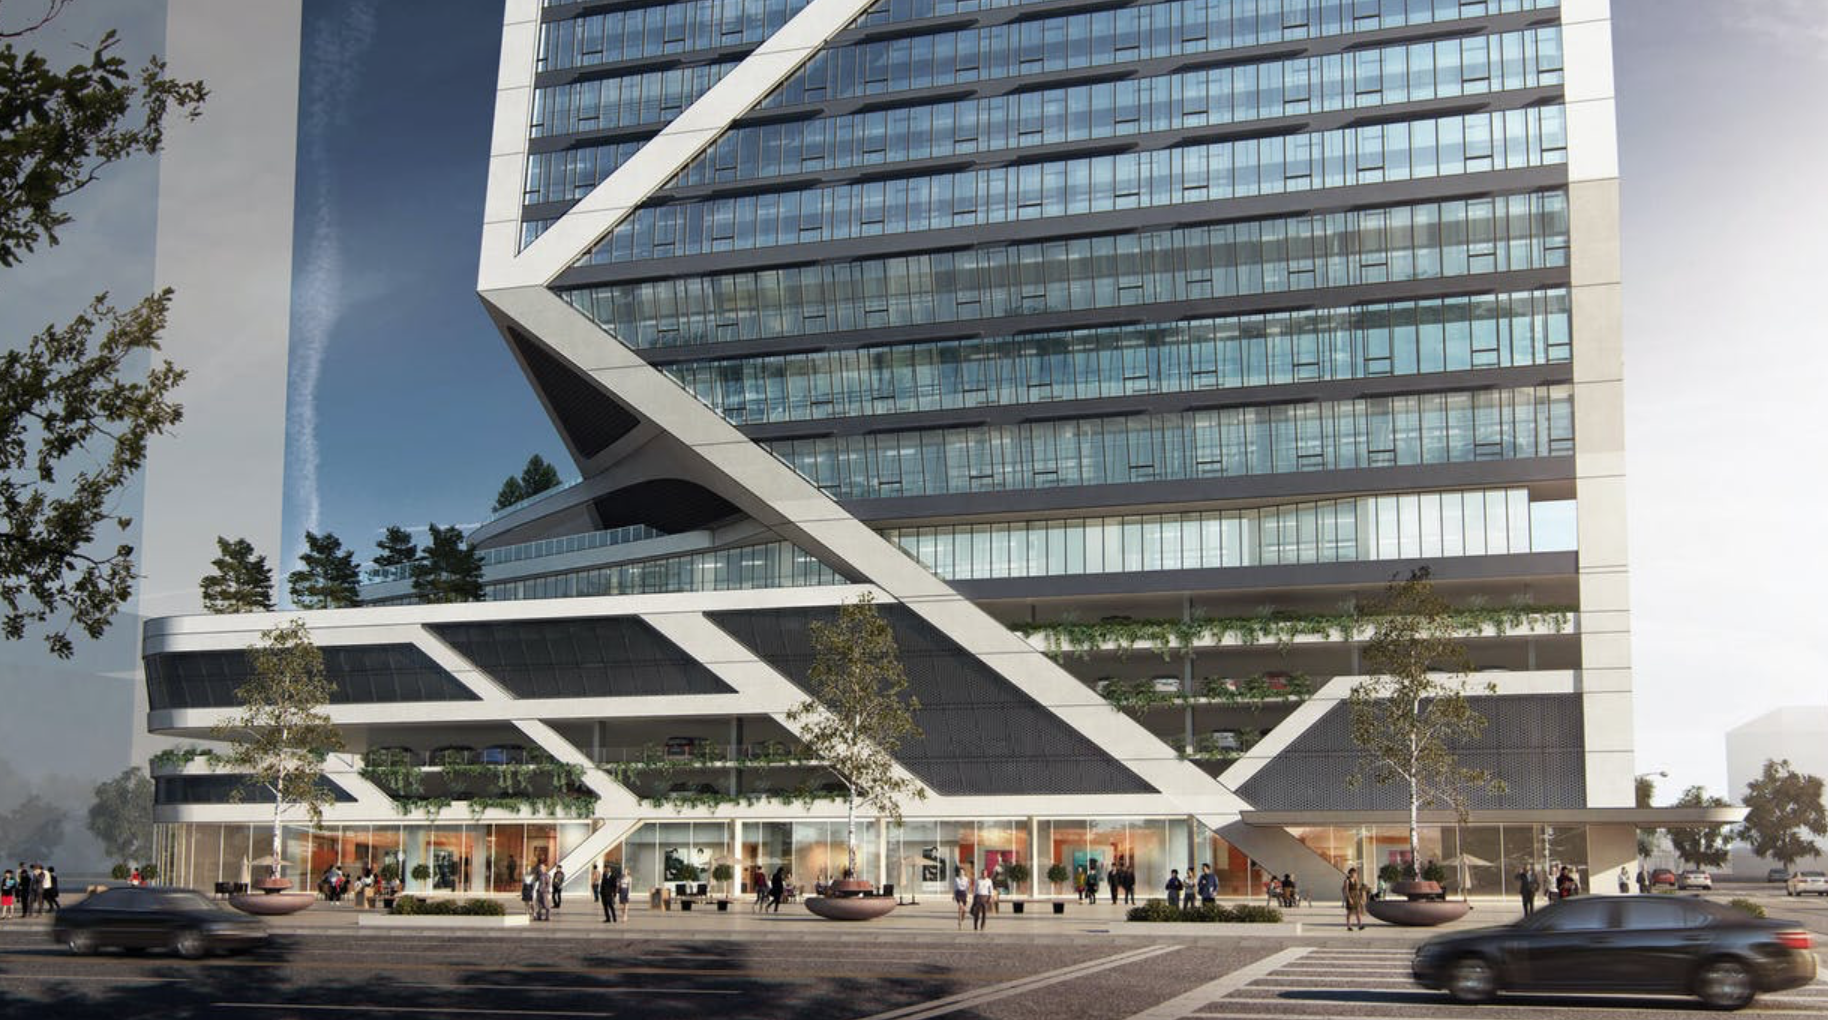 New Rendering of Miami Station. Designed by ODP Architecture & Design.